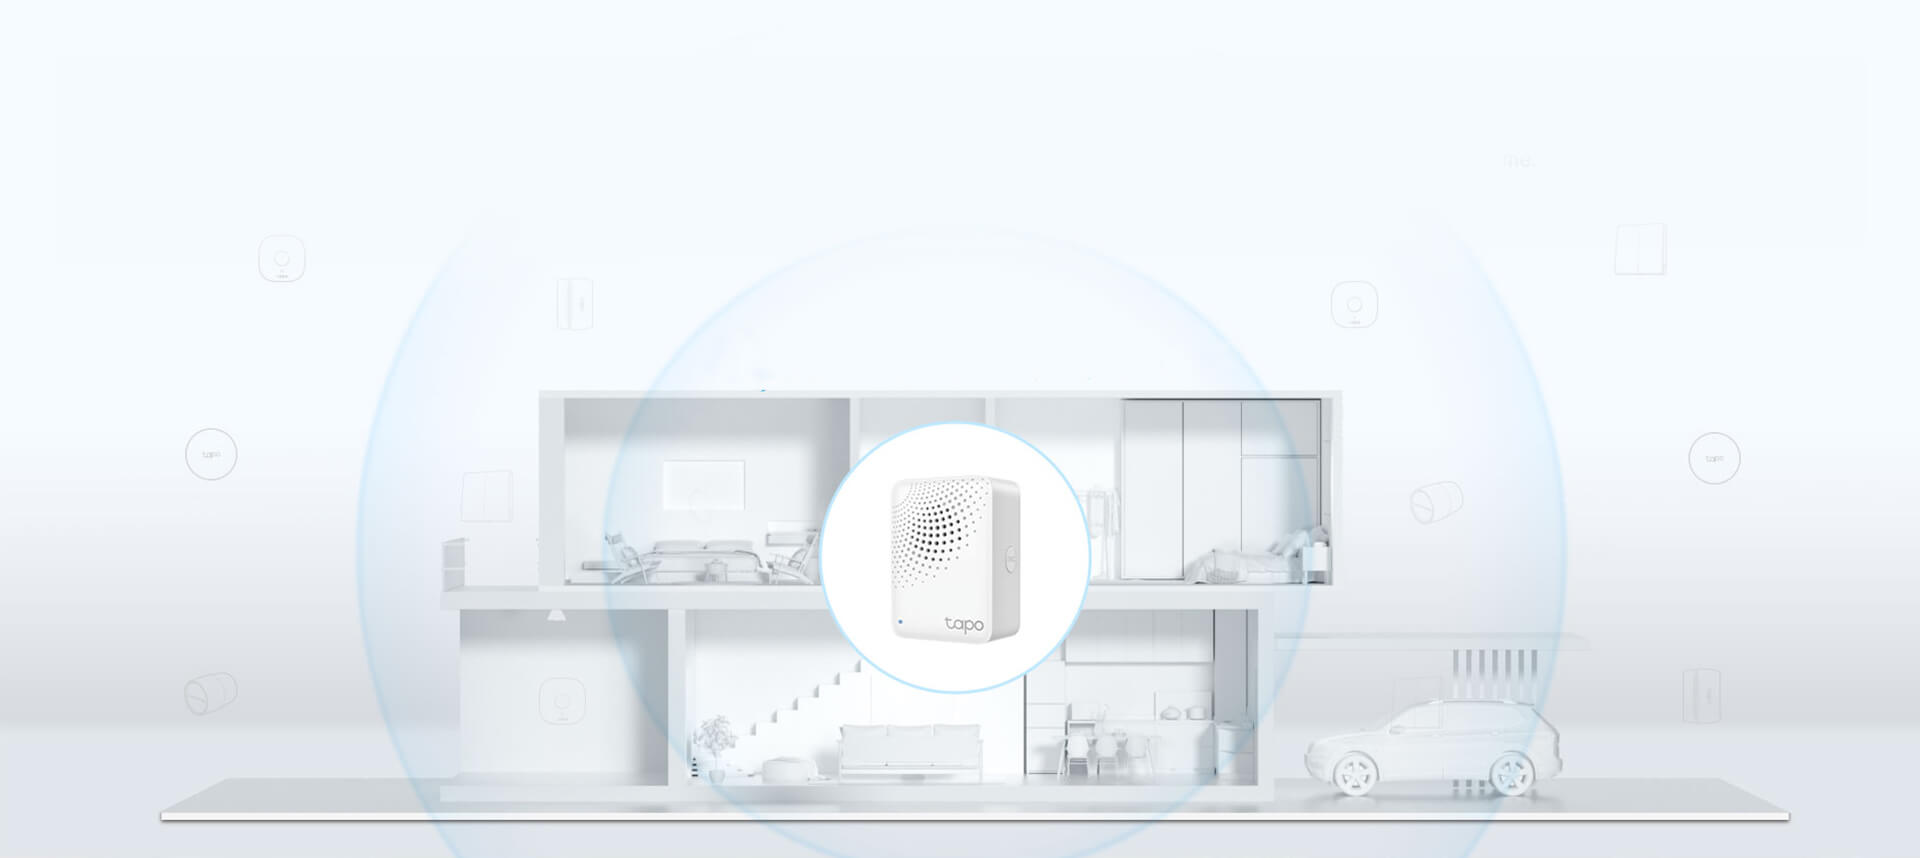 TP-Link Tapo H100 Smart Home IoT Sensor Hub with Chime for Tapo